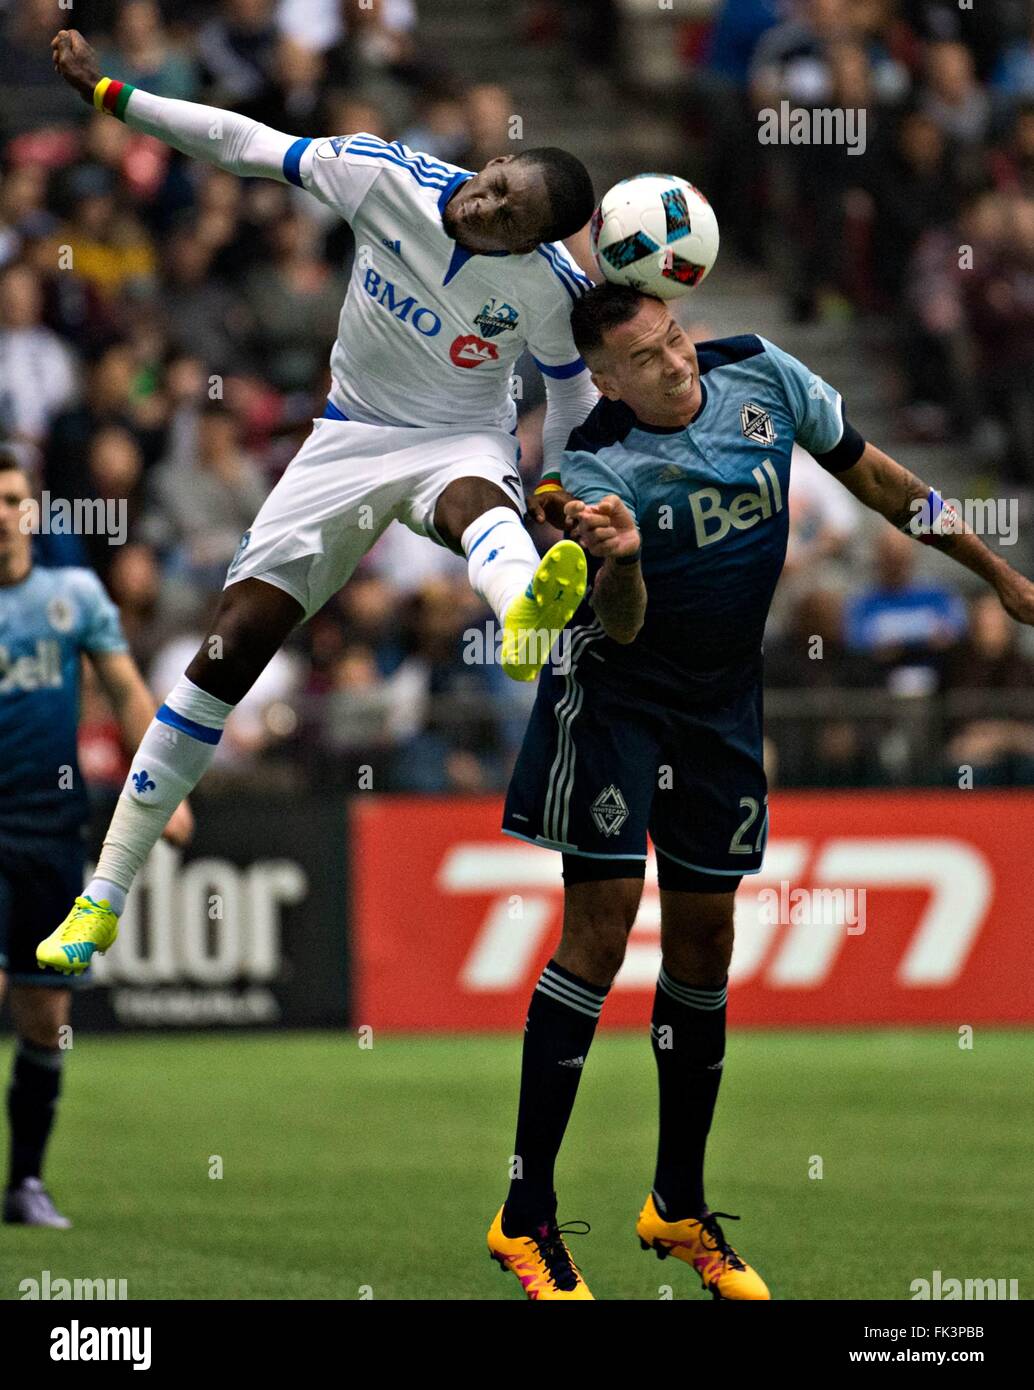 Vancouver, Canada. 6th Mar, 2016. Montreal Impact player Ambroise Oyongo (L) competes for a header with Whitecap player Blas Perez during an MLS game in Vancouver, Canada, March 6, 2016. Montreal Impact won 3-2. © Andrew Soong/Xinhua/Alamy Live News Stock Photo